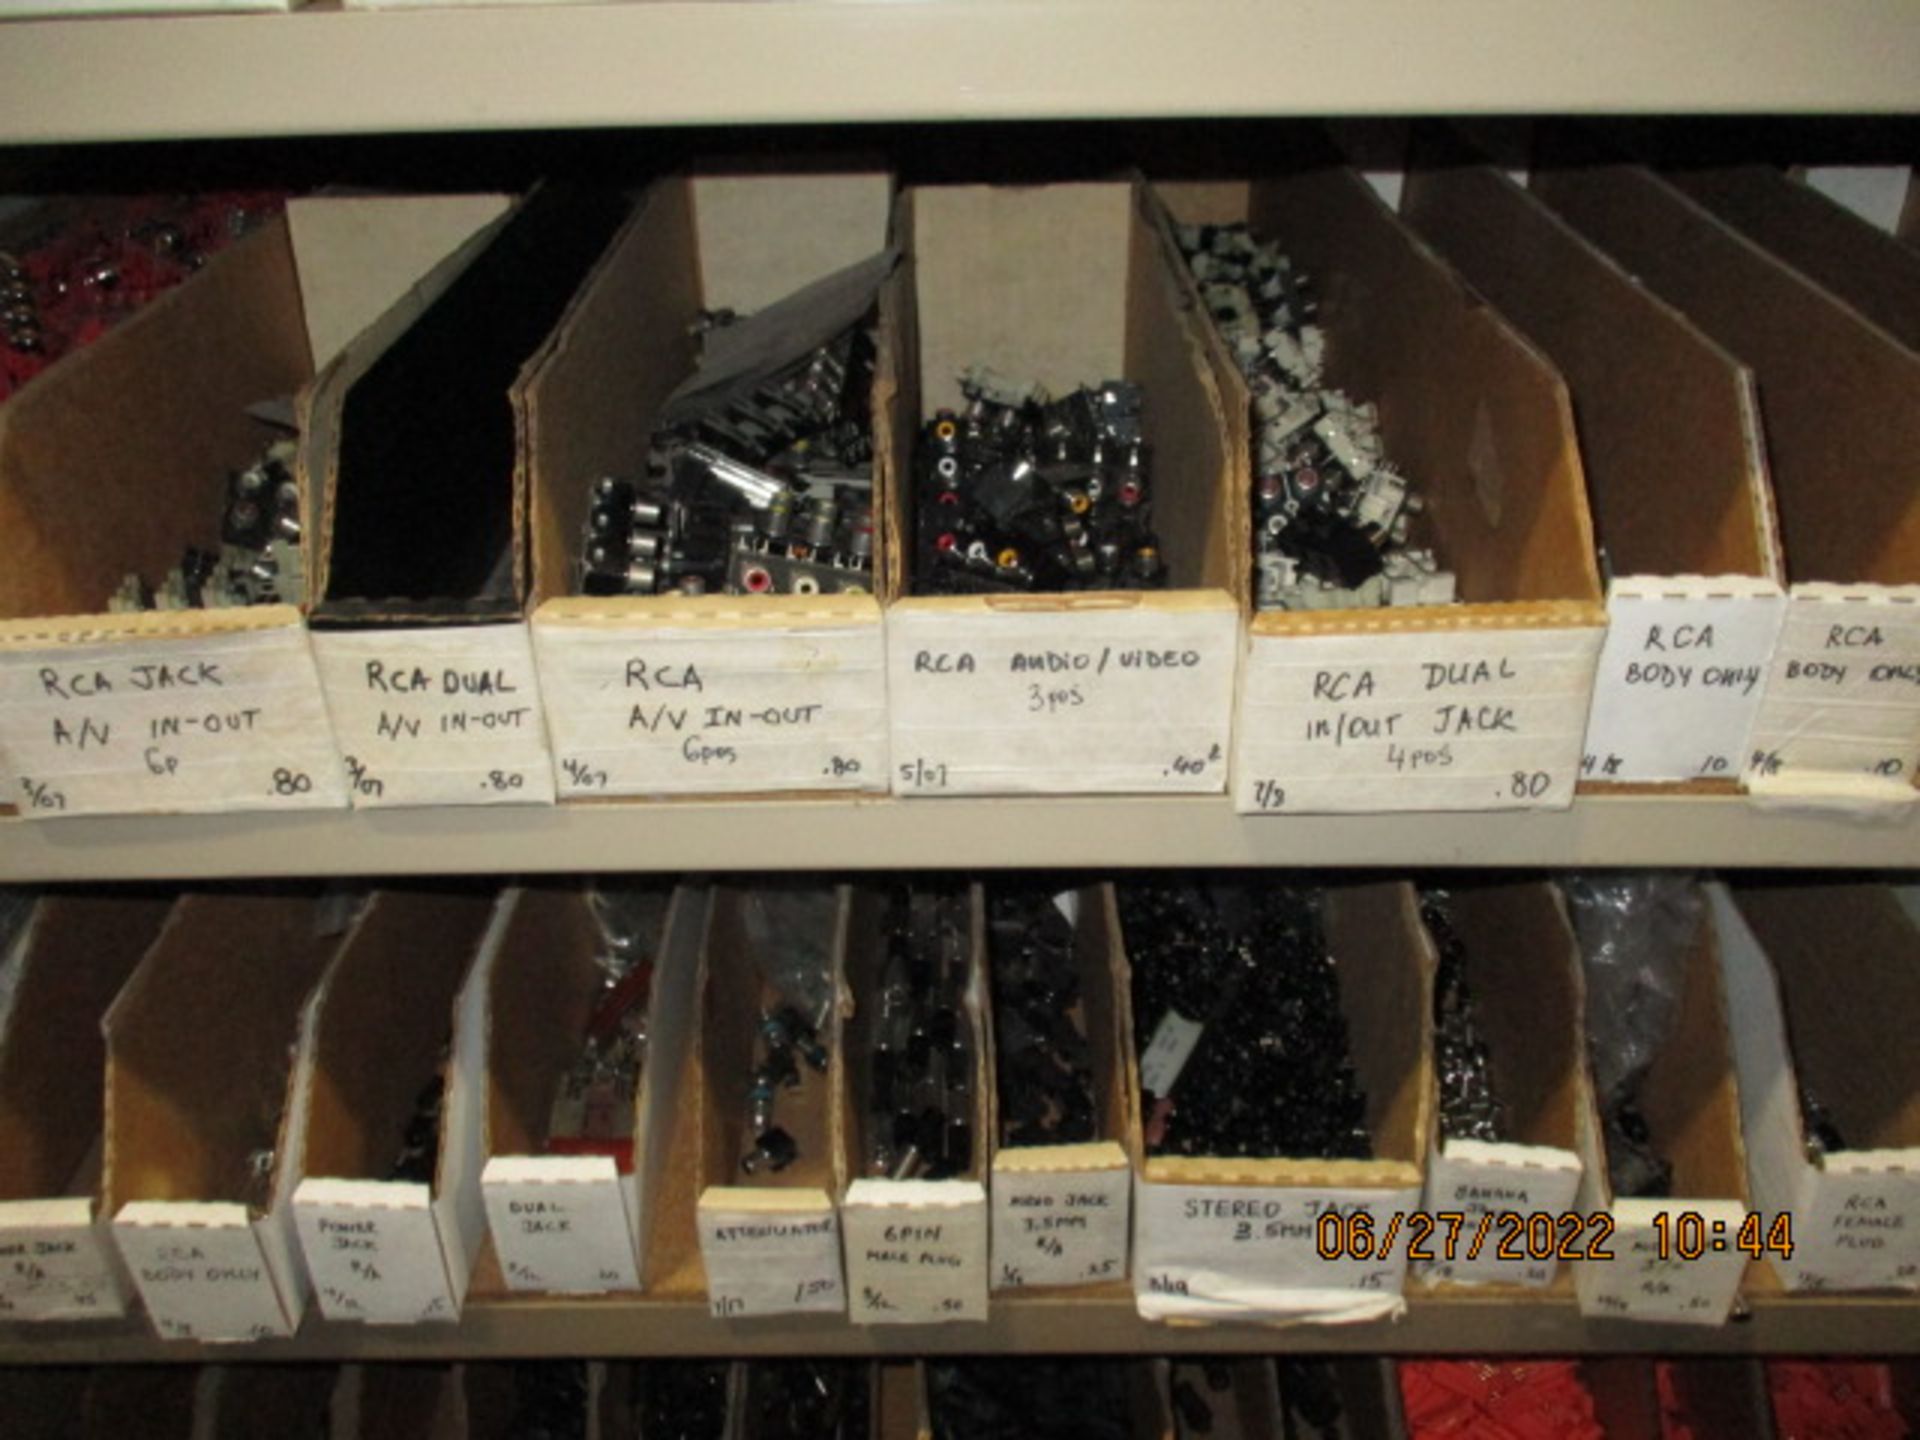 CONTENTS OF SHELVING UNIT CONSISTING OF RCA JACKS, RCA CONNECTORS GOLD, RCA DUAL IN/OUT JACKS, - Image 5 of 7